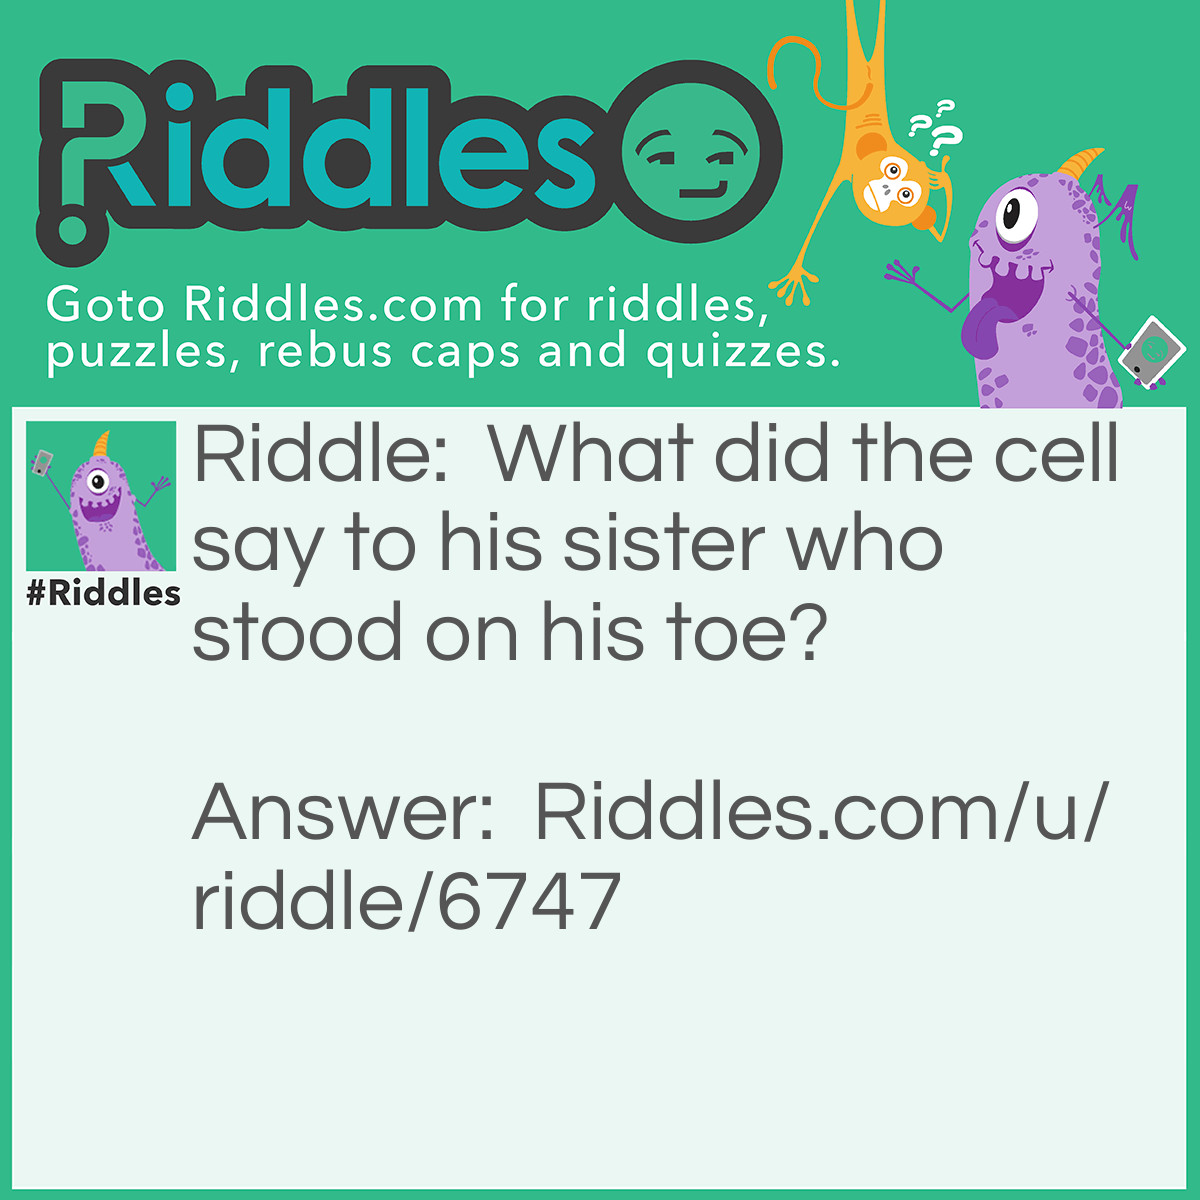 Riddle: What did the cell say to his sister who stood on his toe? Answer: Mitosis! ( My - toe - sis)